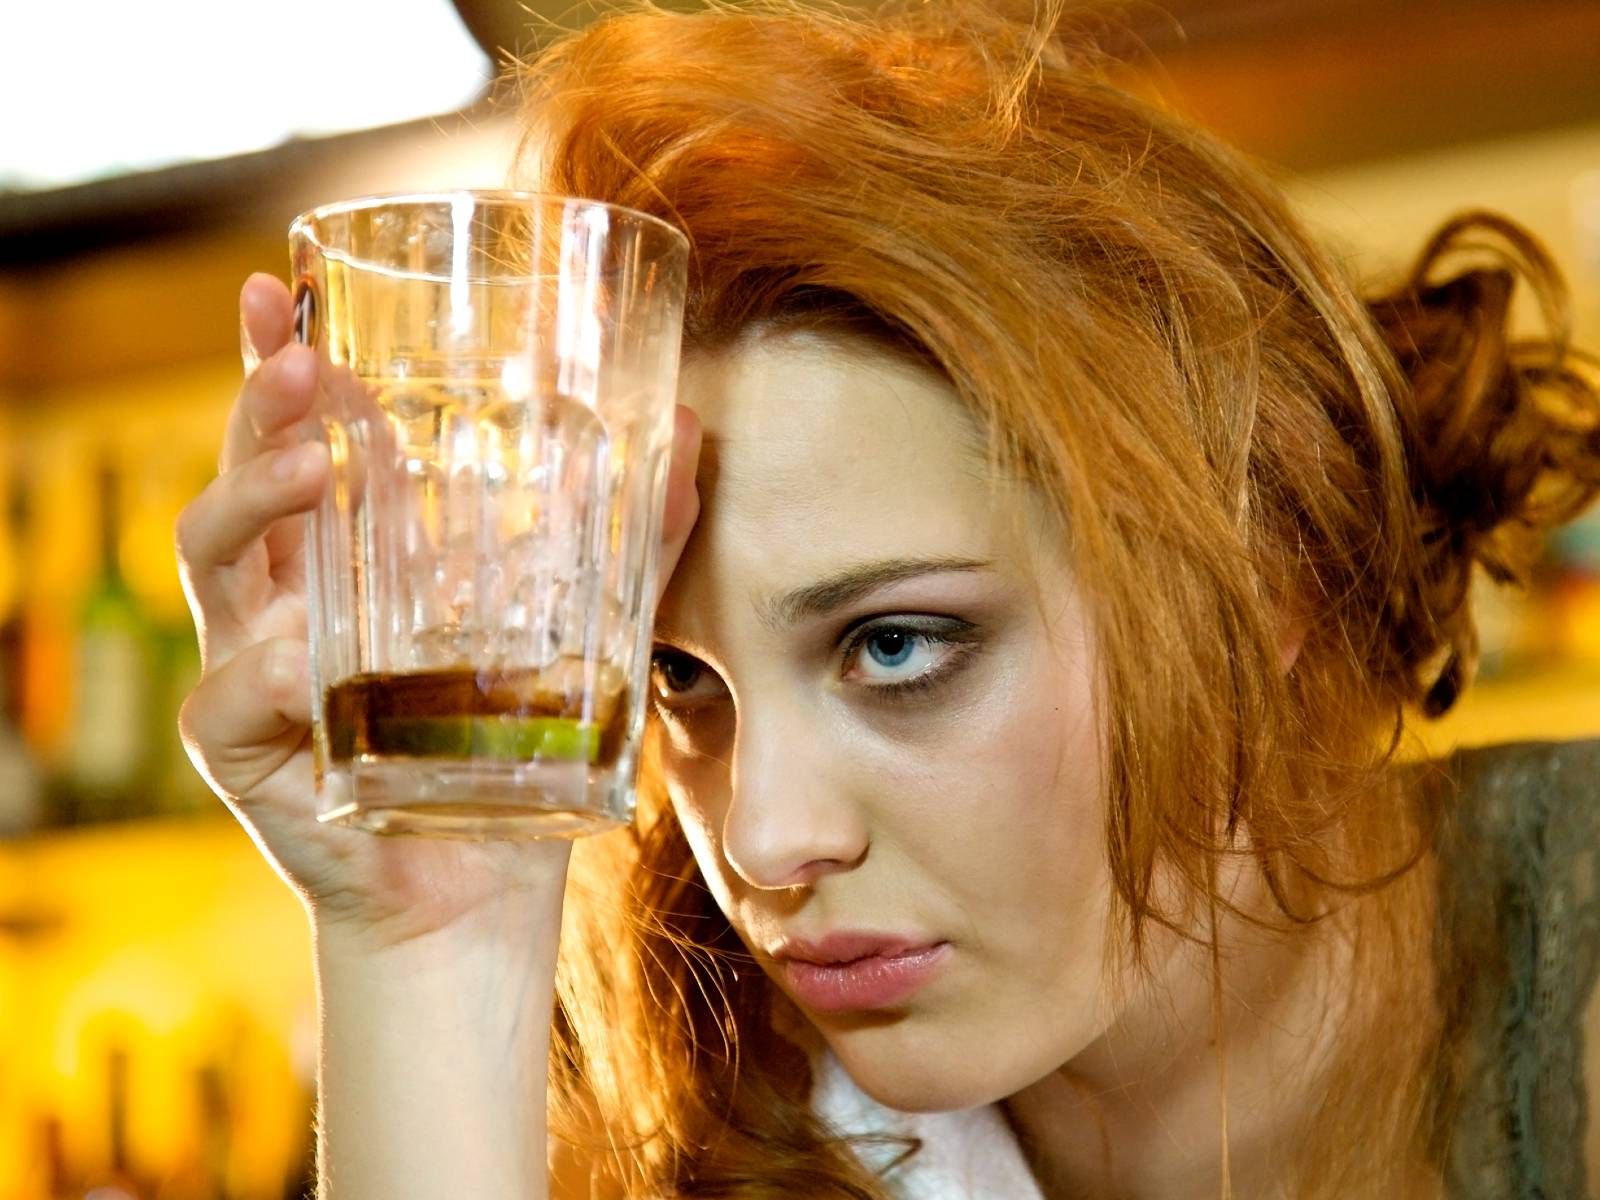 Humans have been trying to ease hangover symptoms for a long, long time.